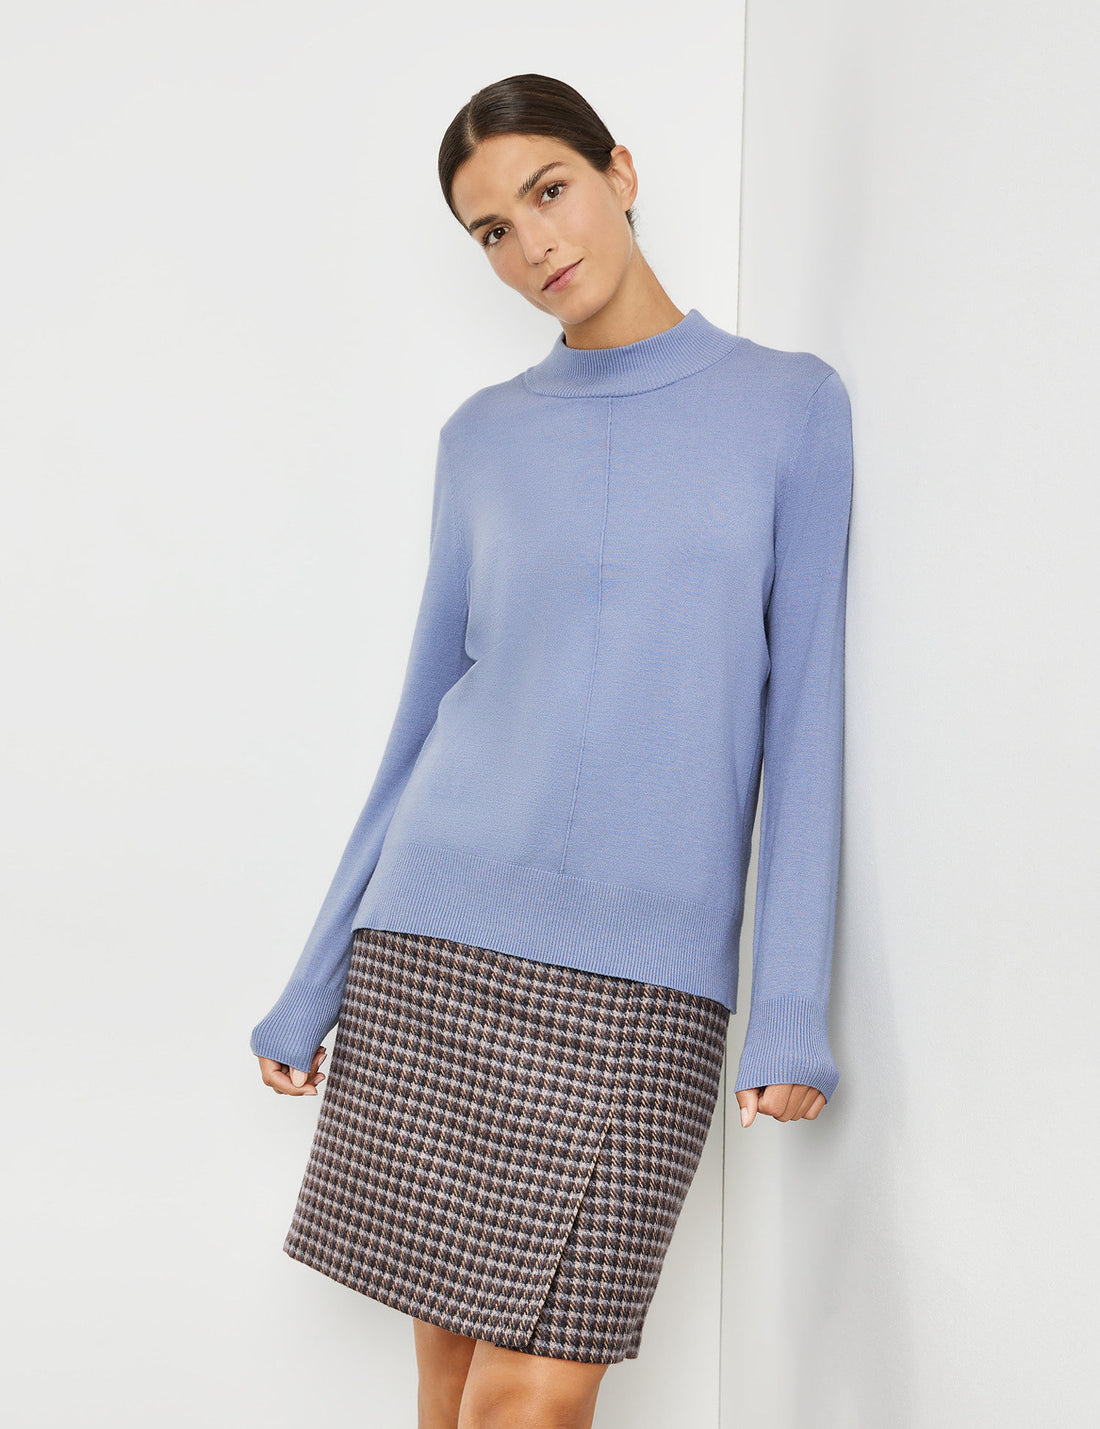 Jumper In A Knit Blend With An Elongated Back_170529-44723_80191_01